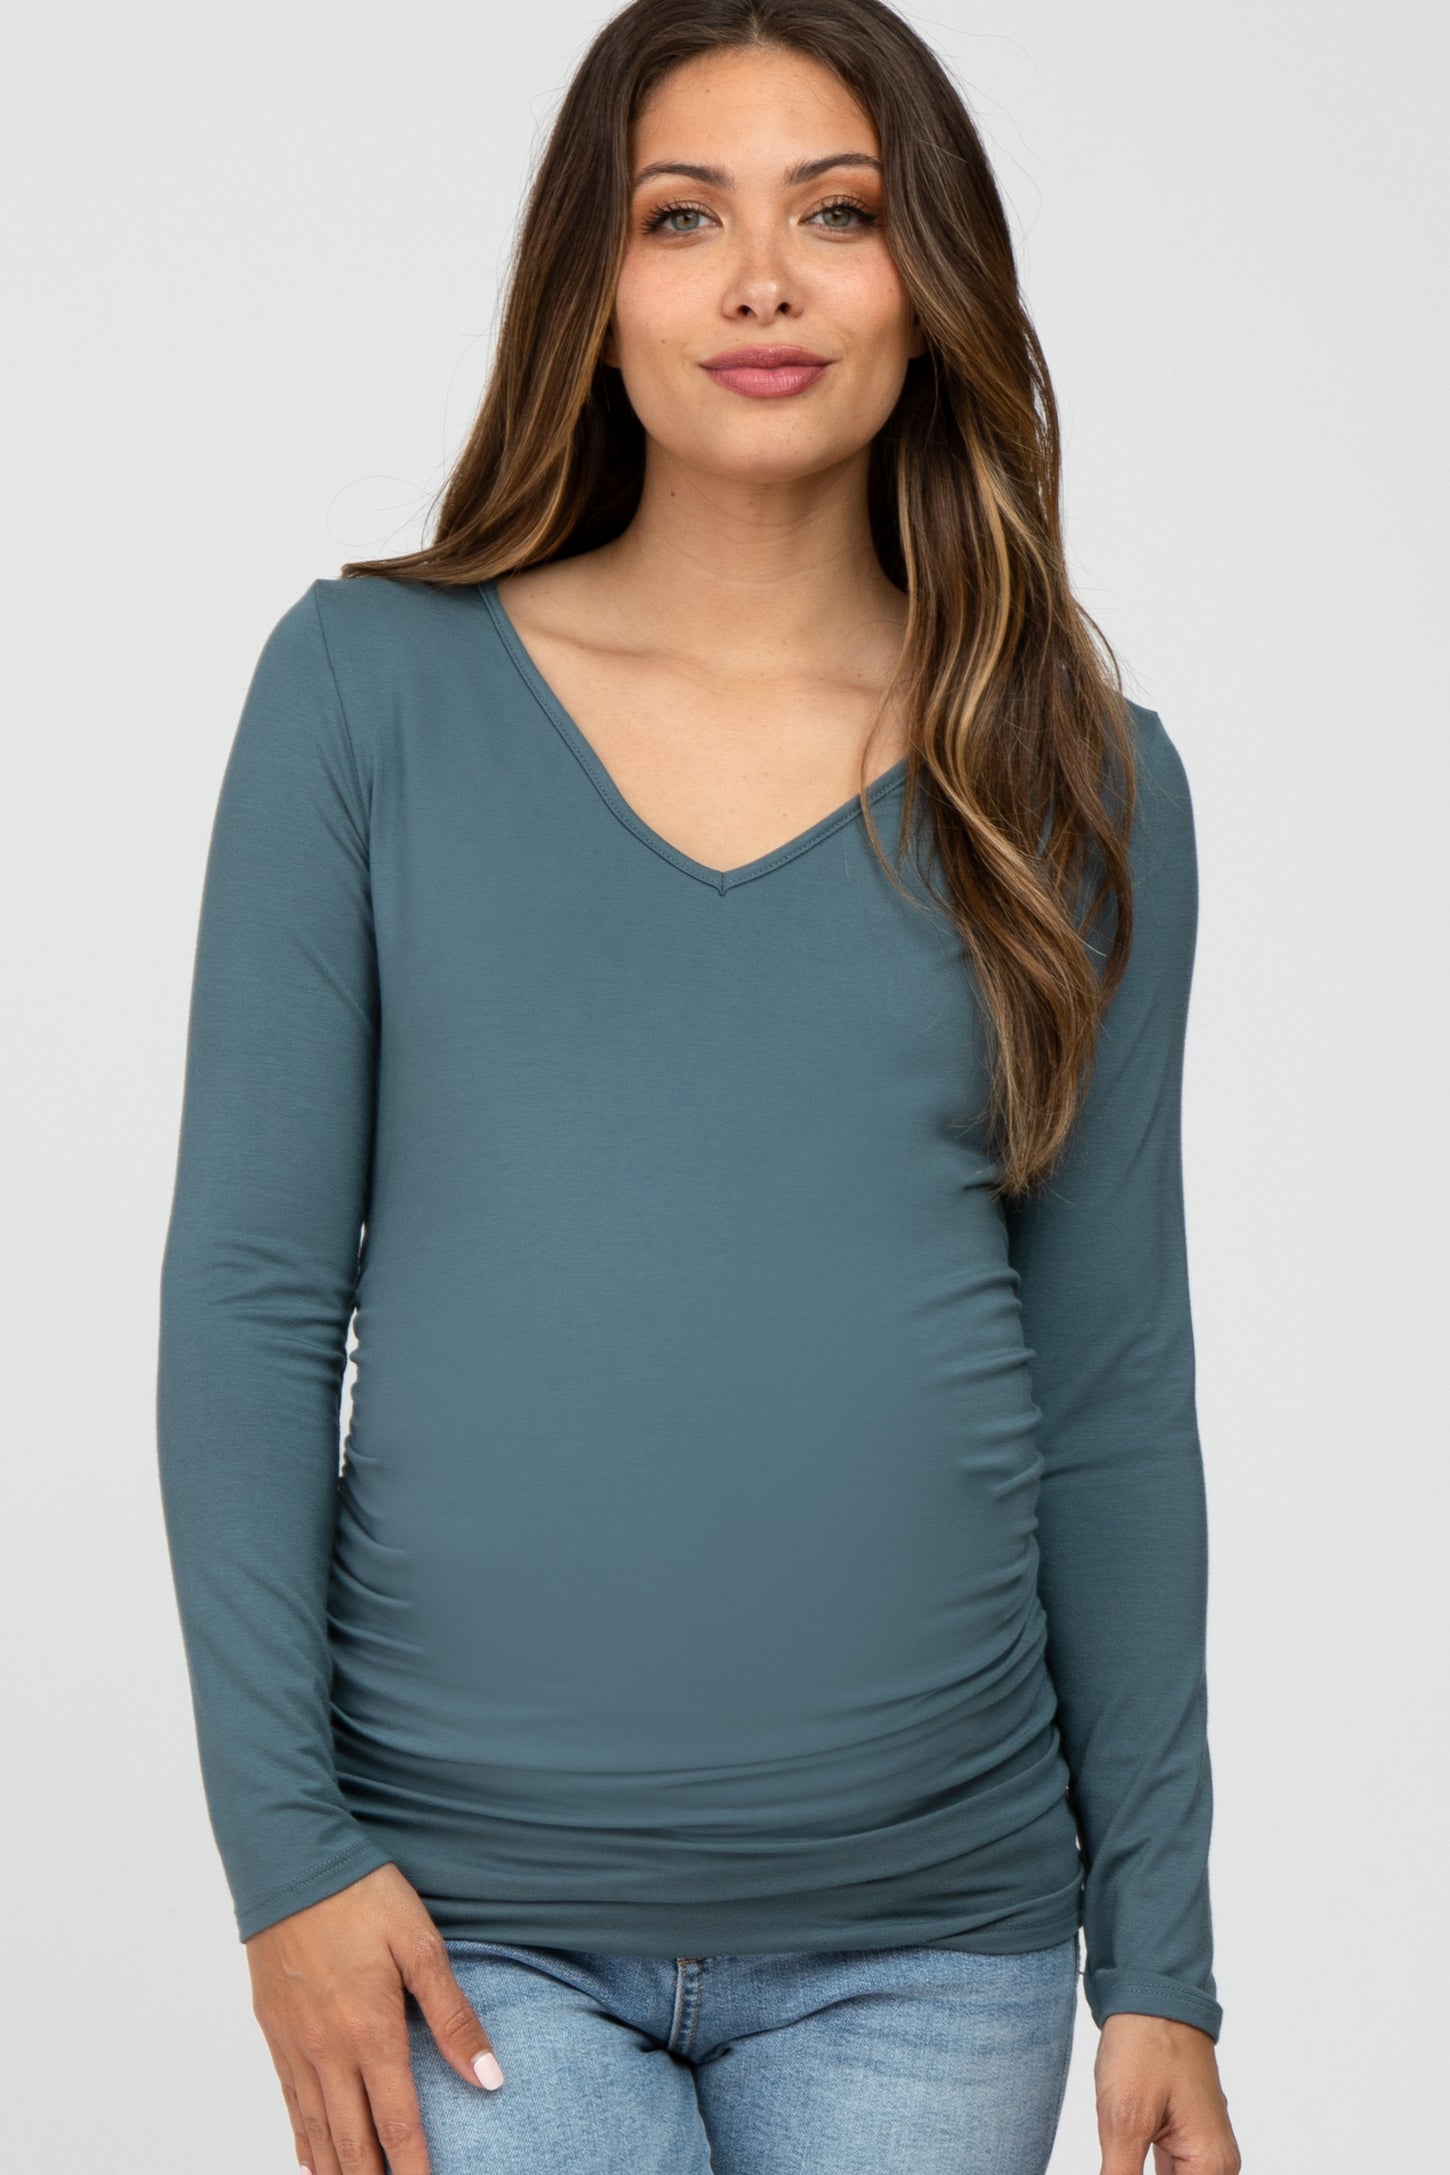 Dark Teal Long Sleeve Fitted Ruched Maternity Top